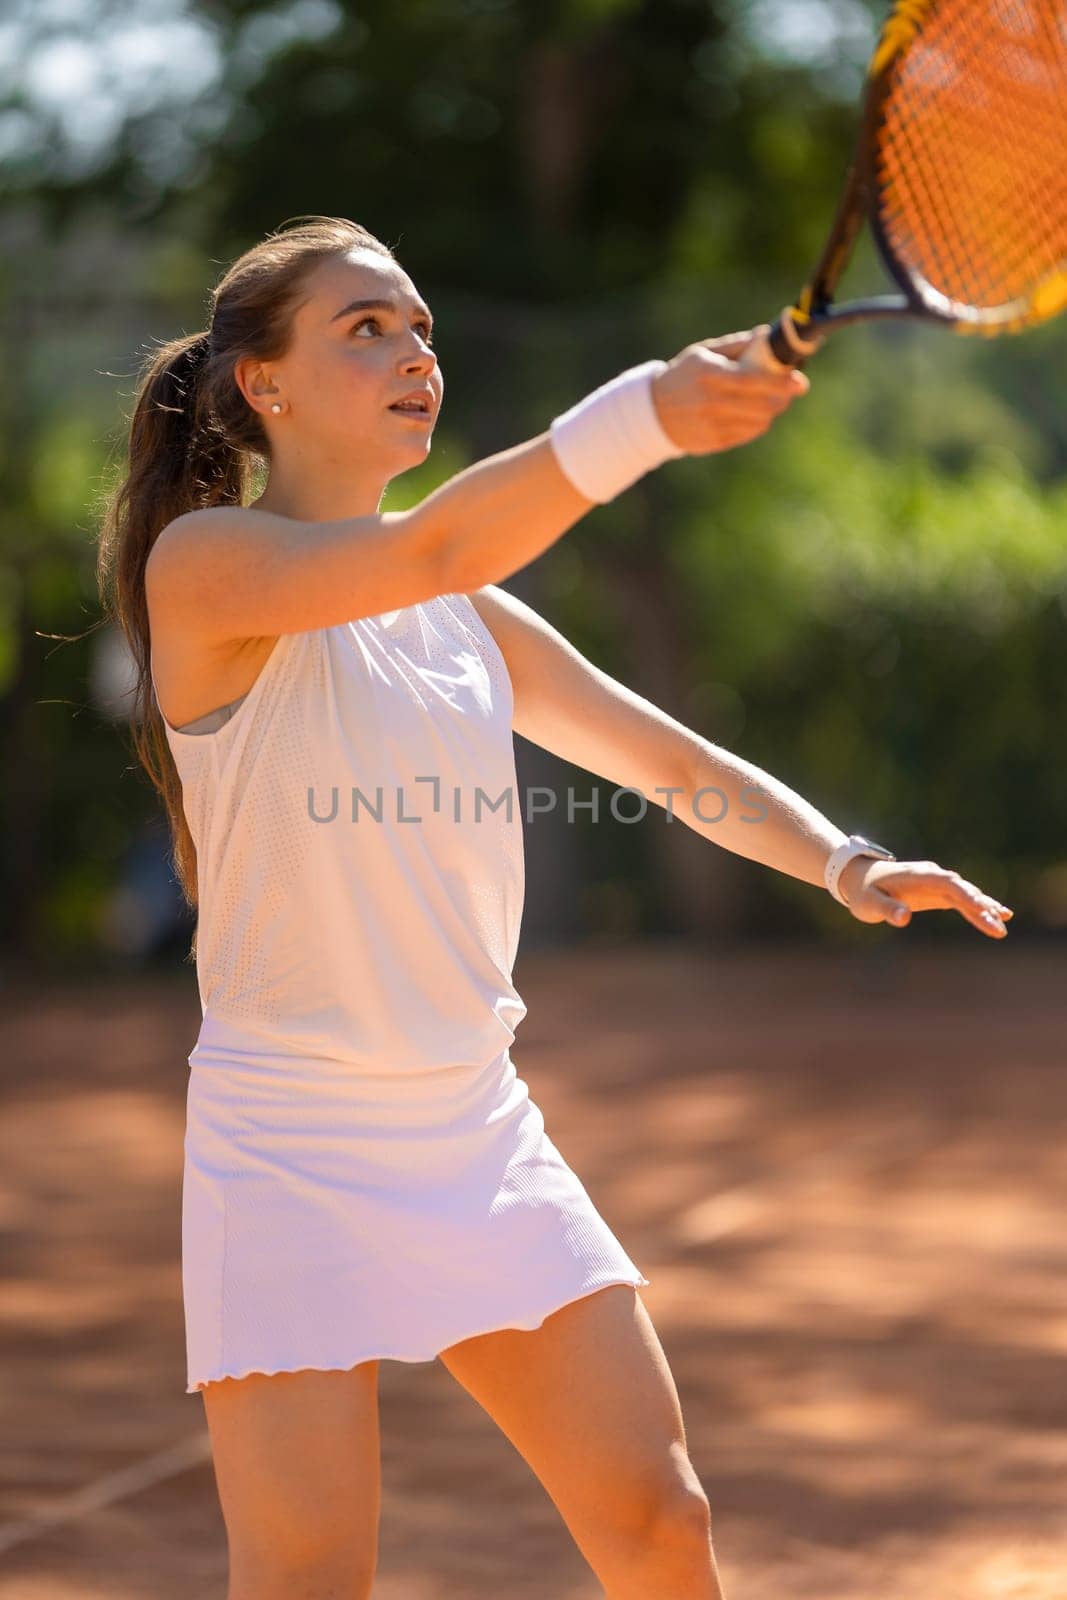 A woman is playing tennis on a court. She is wearing a white shirt and a white skirt